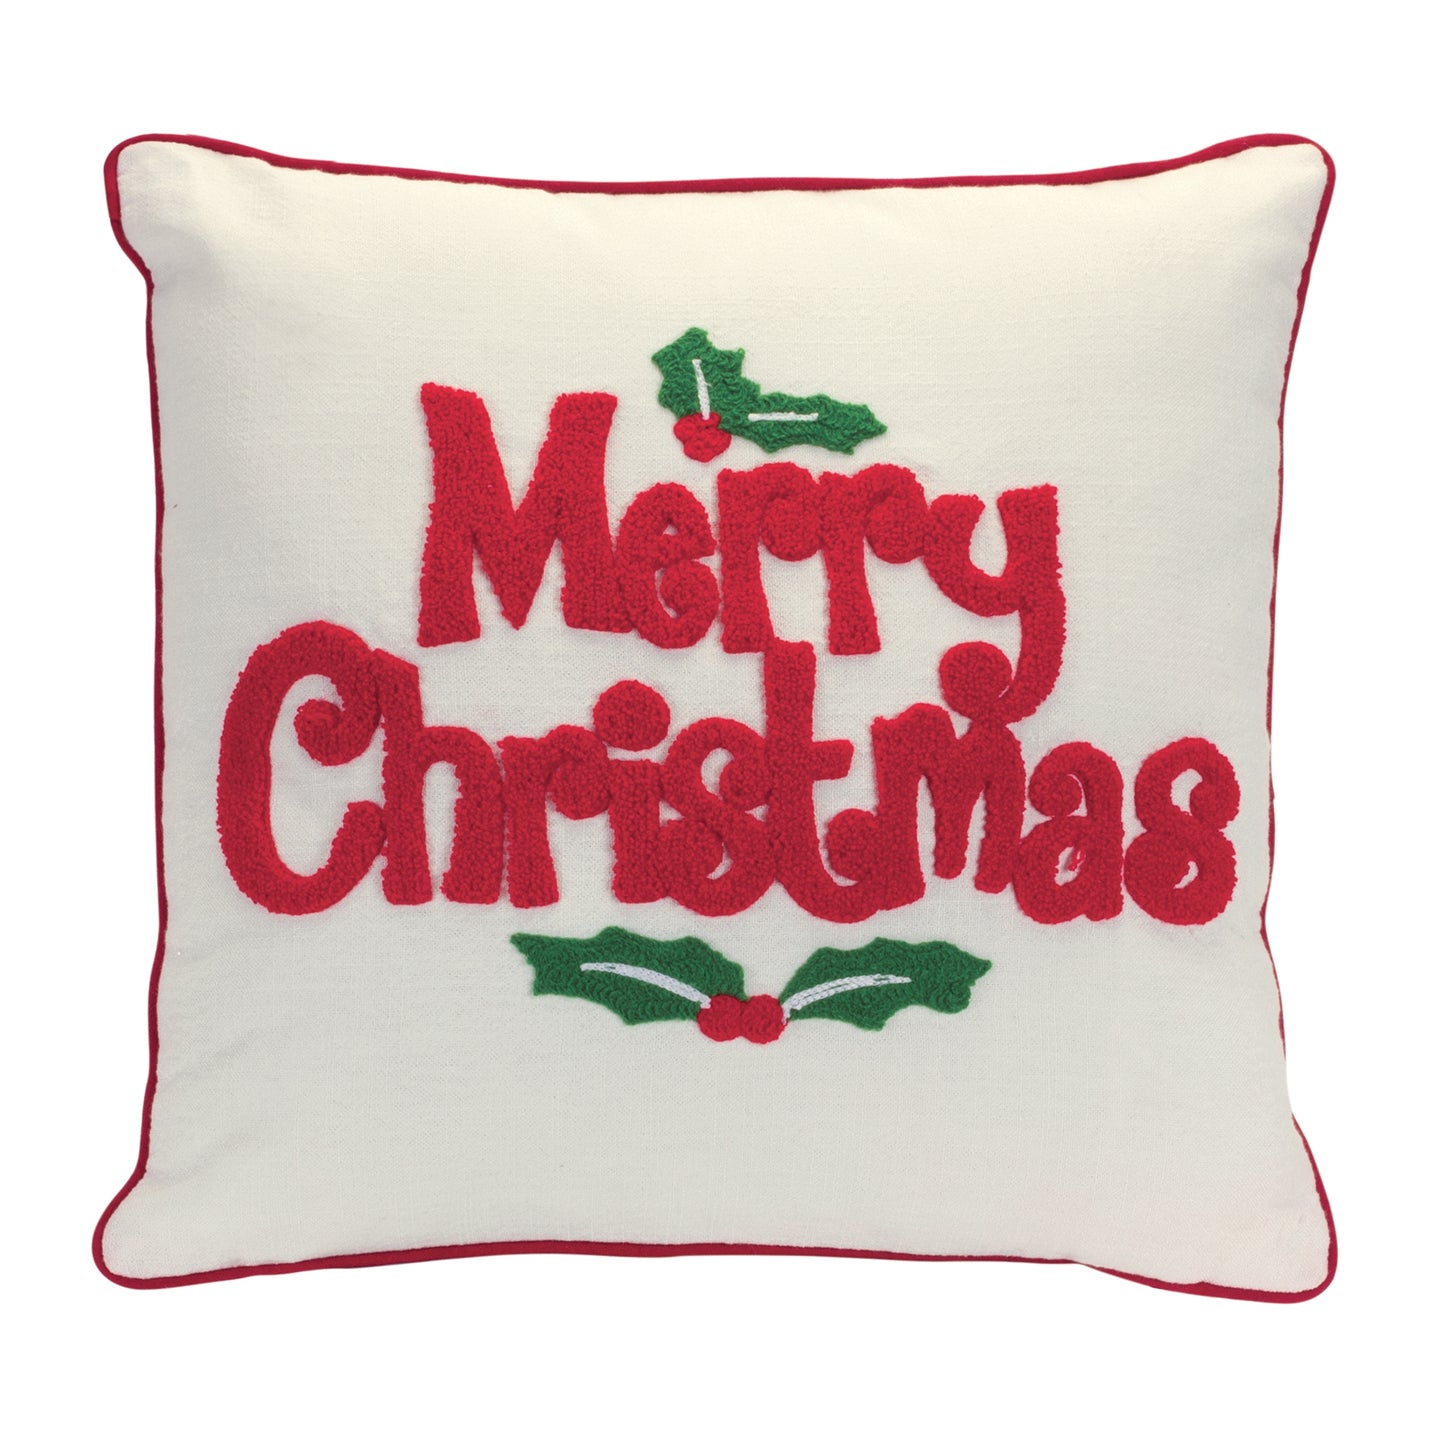 Merry Christmas Holly Berry Throw Pillow 16"SQ